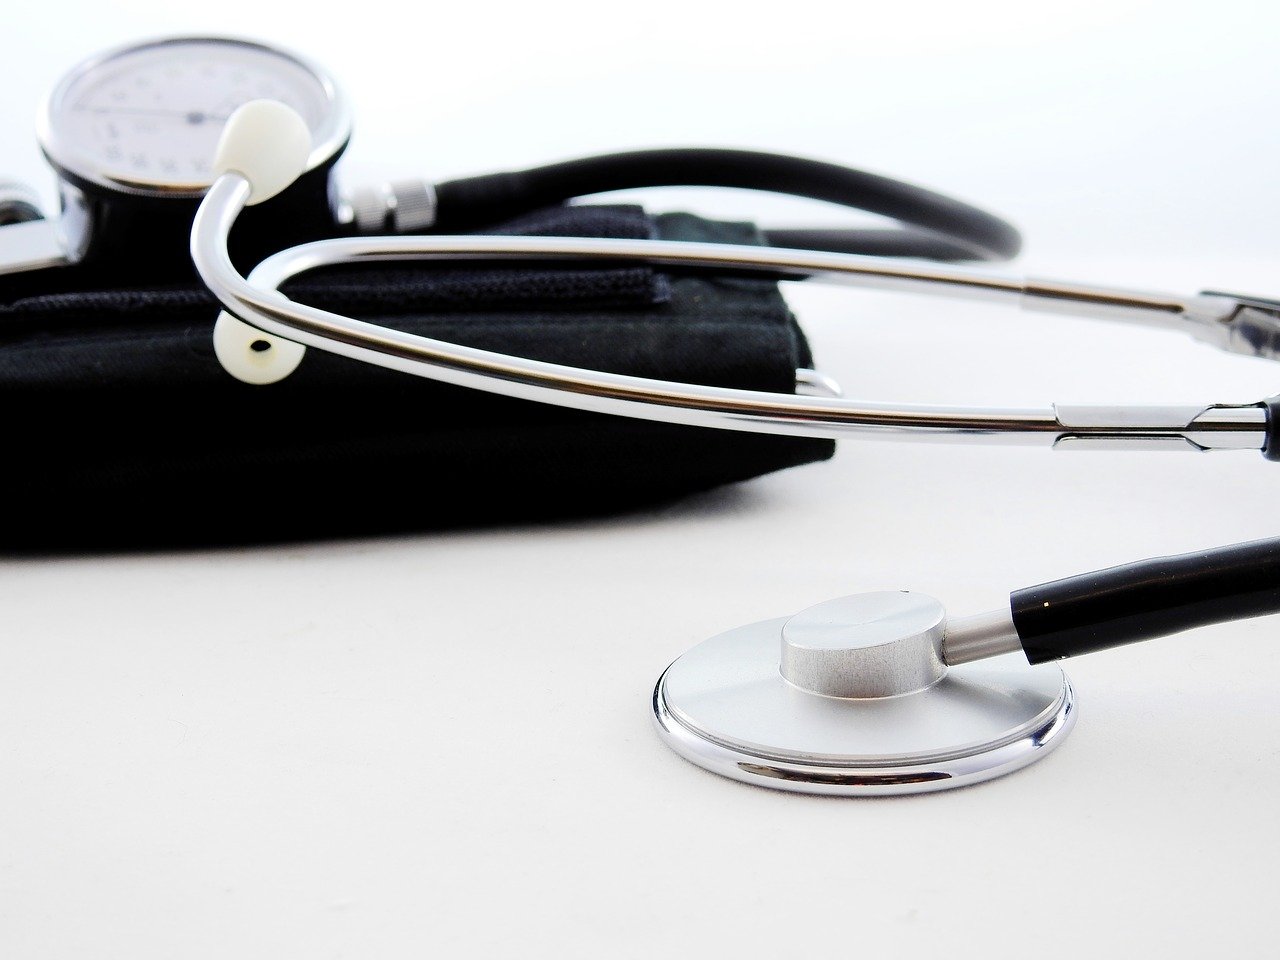 STETHOSCOPE: Best brands of Stethoscopes for students